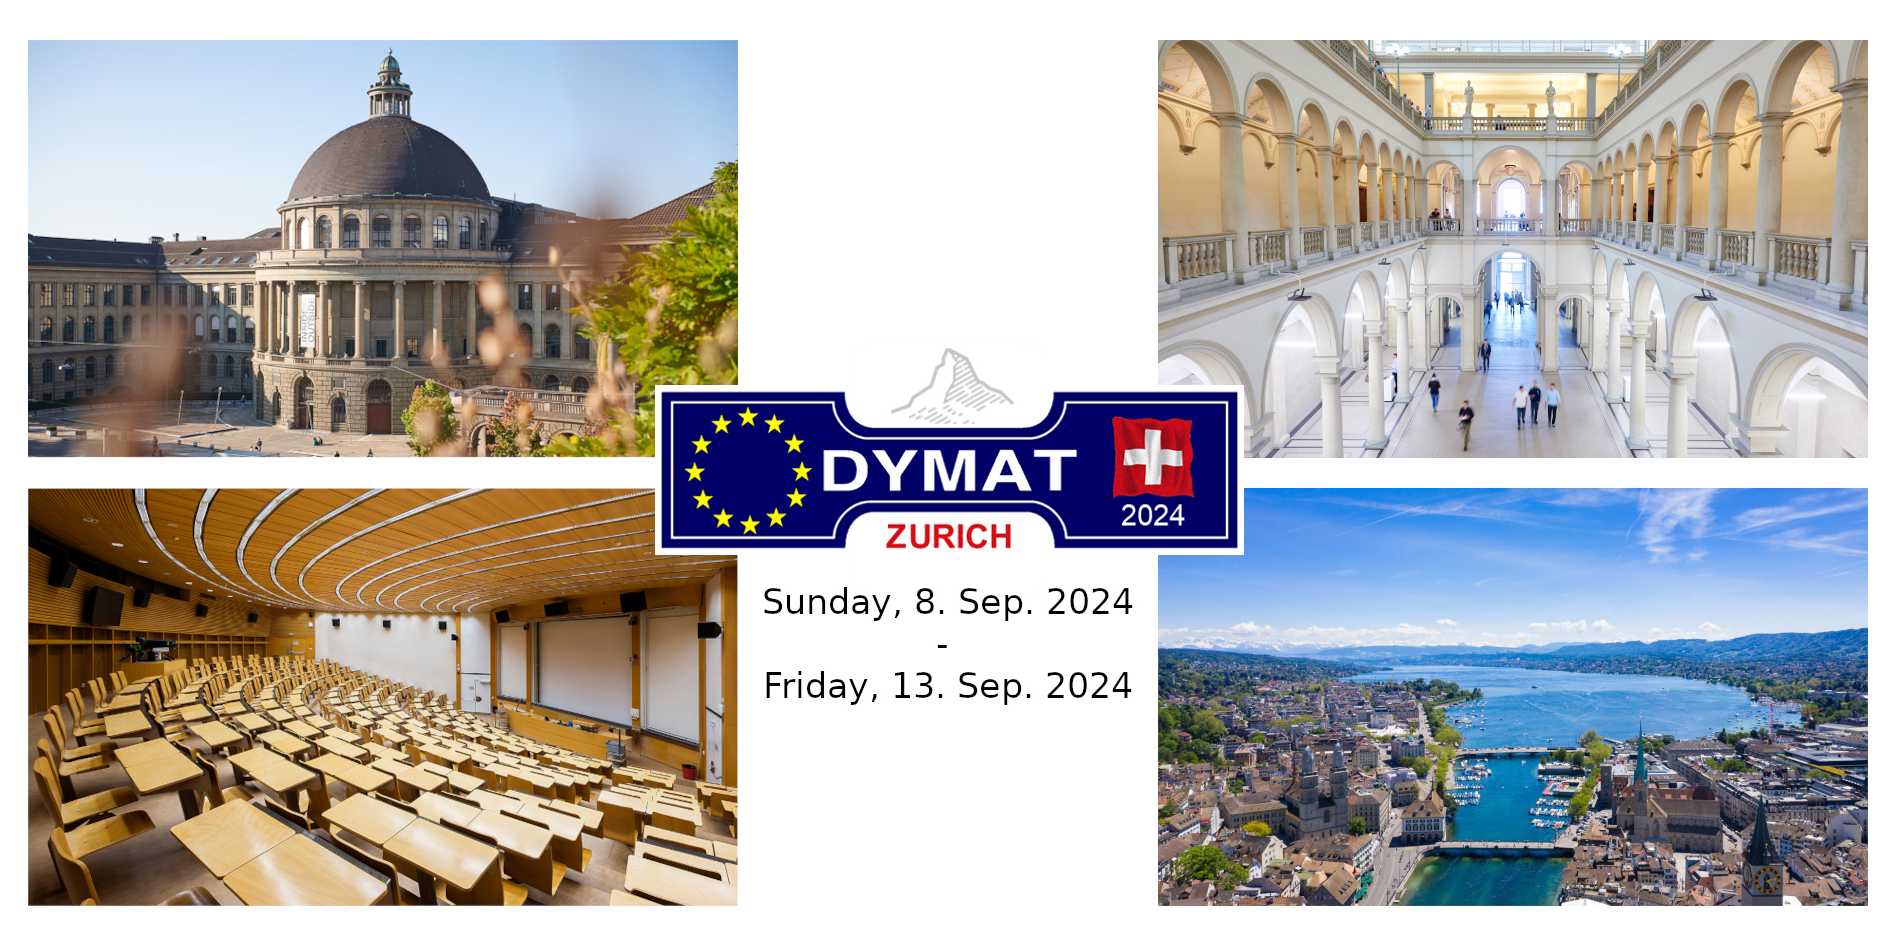 Dymat 2024 in Zurich from Sunday, 8 September to Friday, 13 September